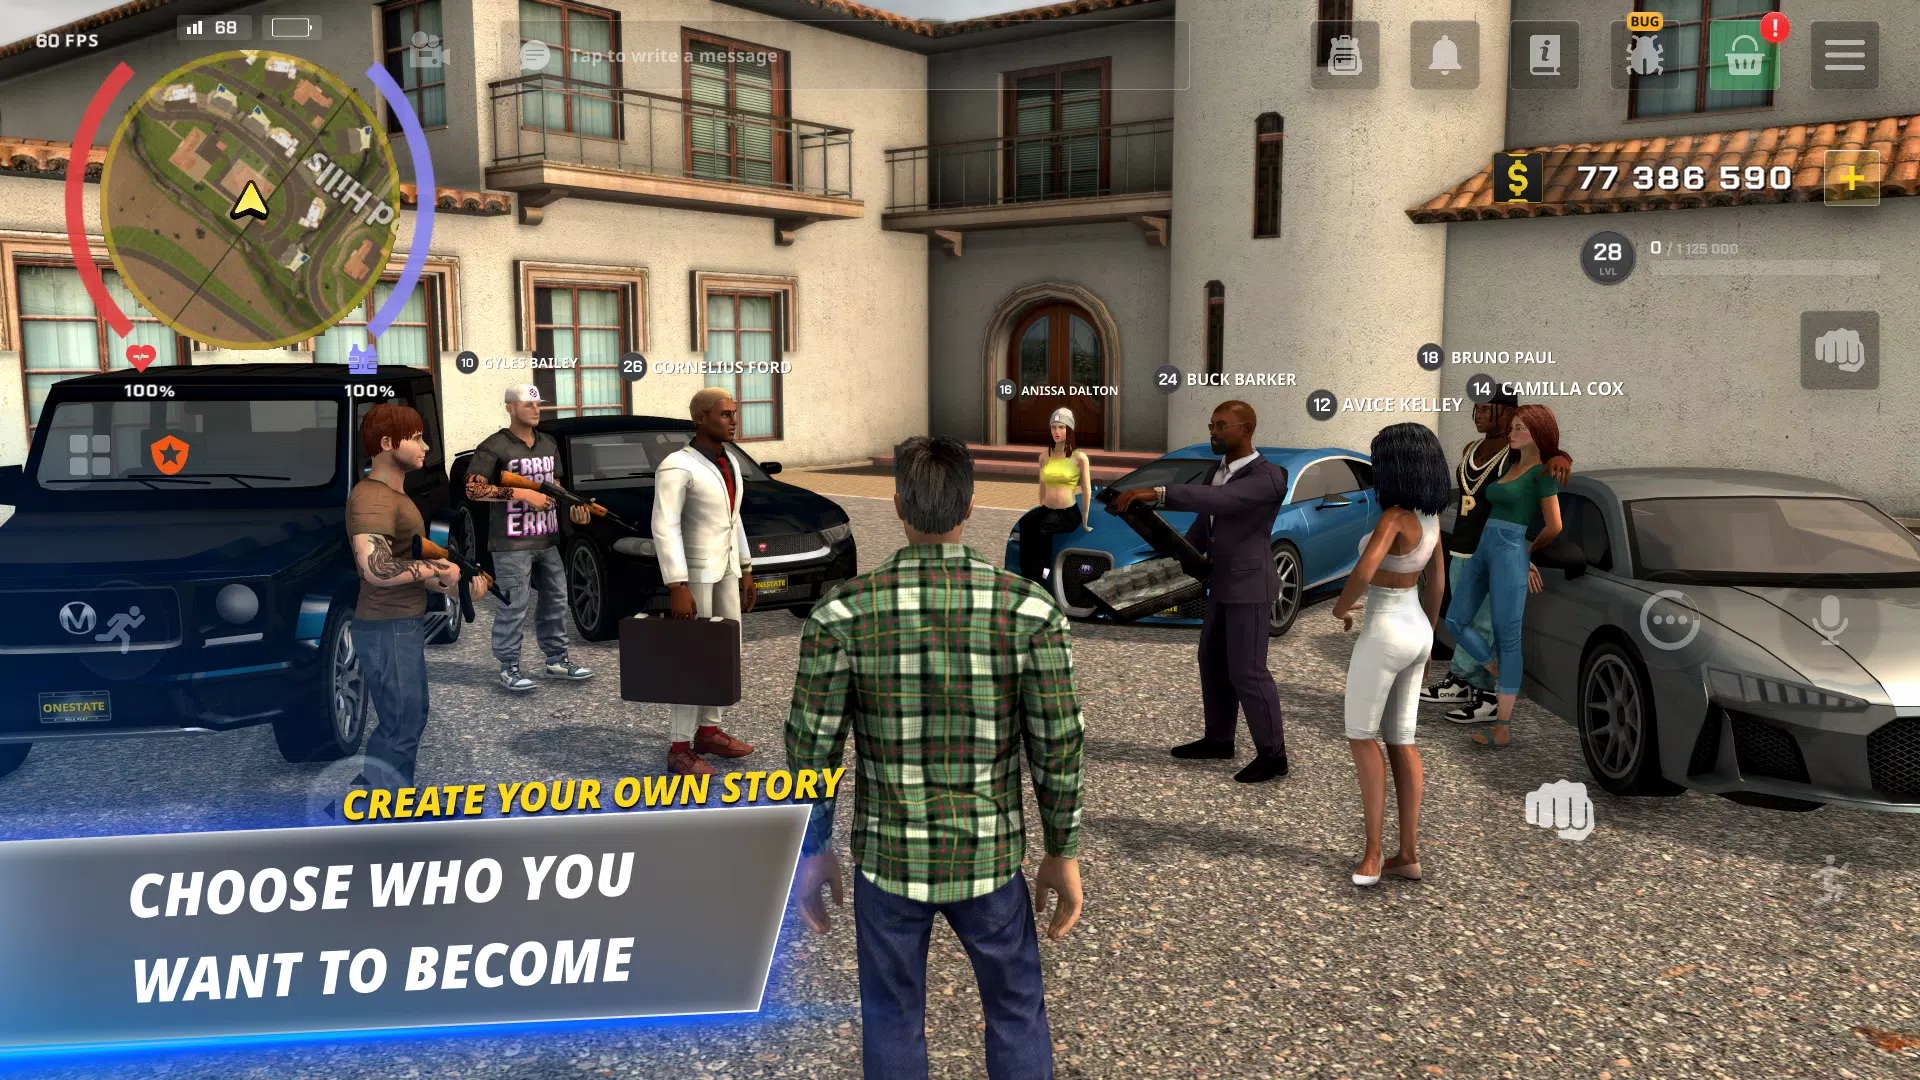 Download One State RP - Life Simulator MOD APK v0.36.3 (No ads) For Android